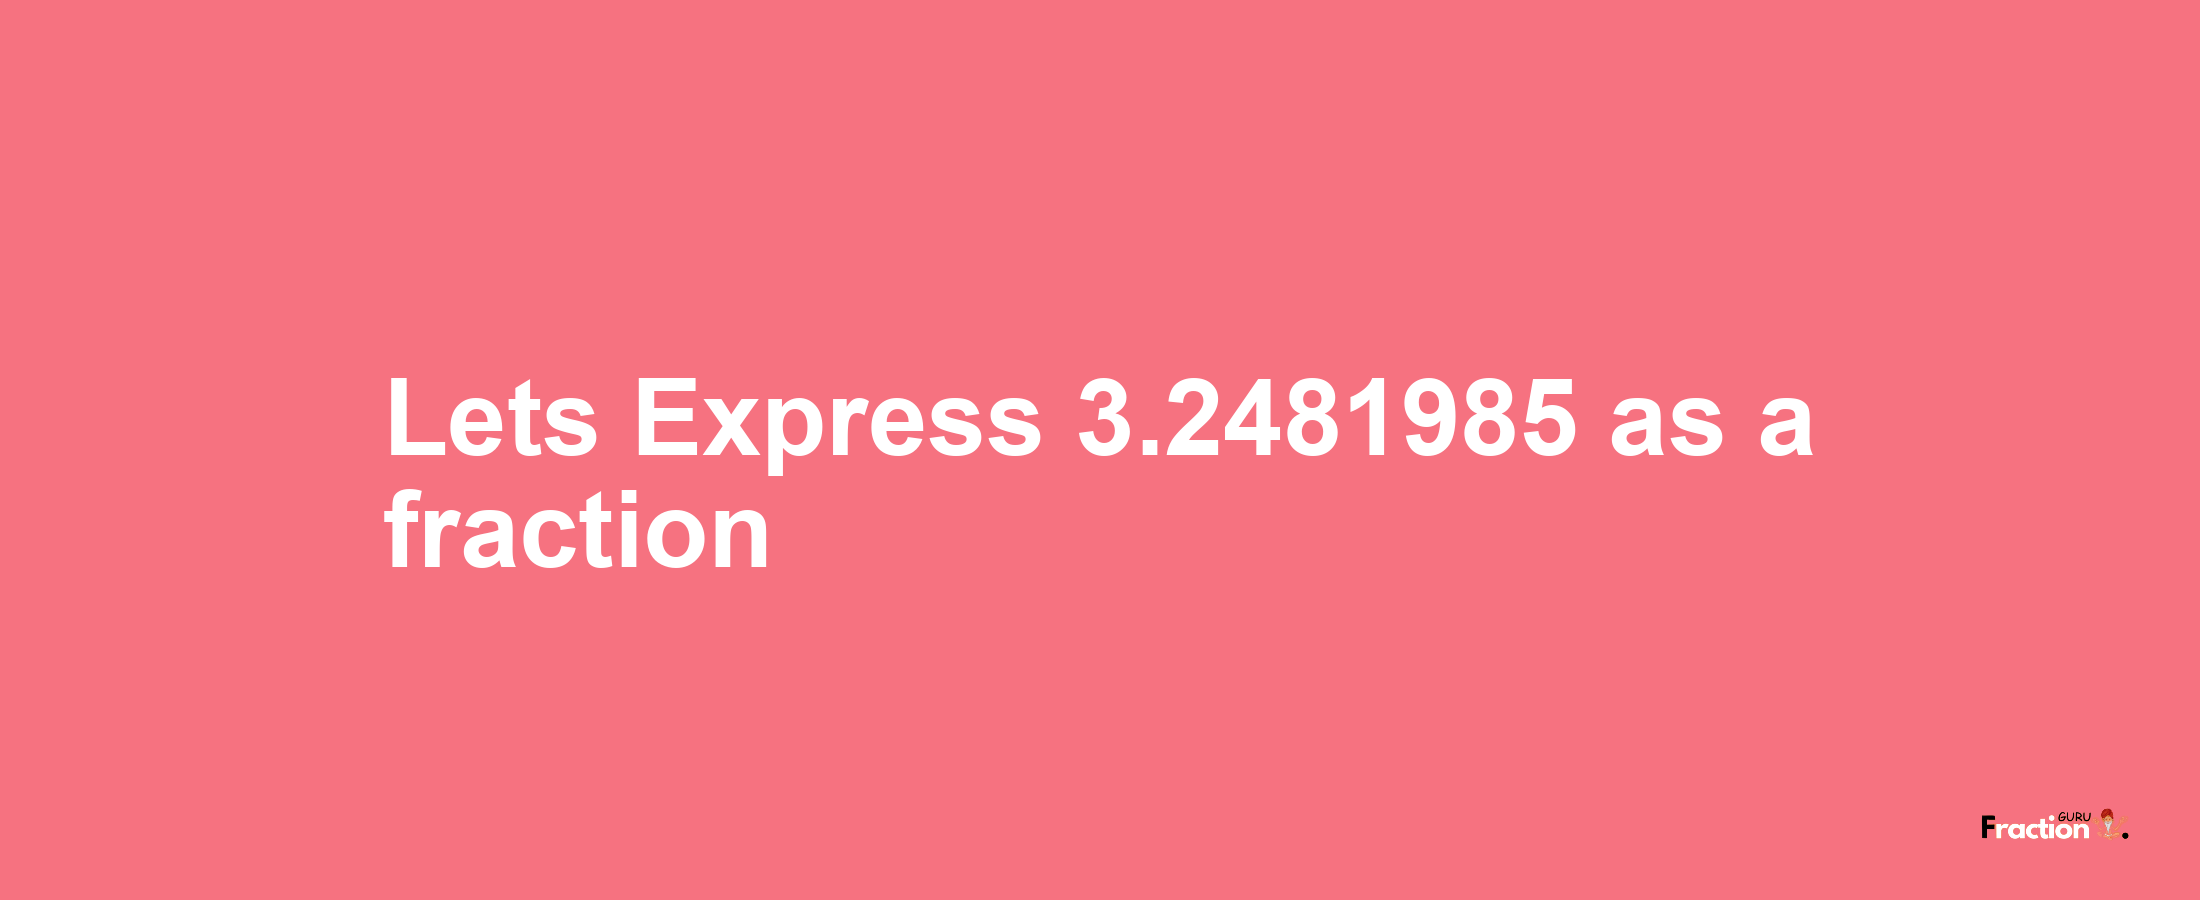 Lets Express 3.2481985 as afraction